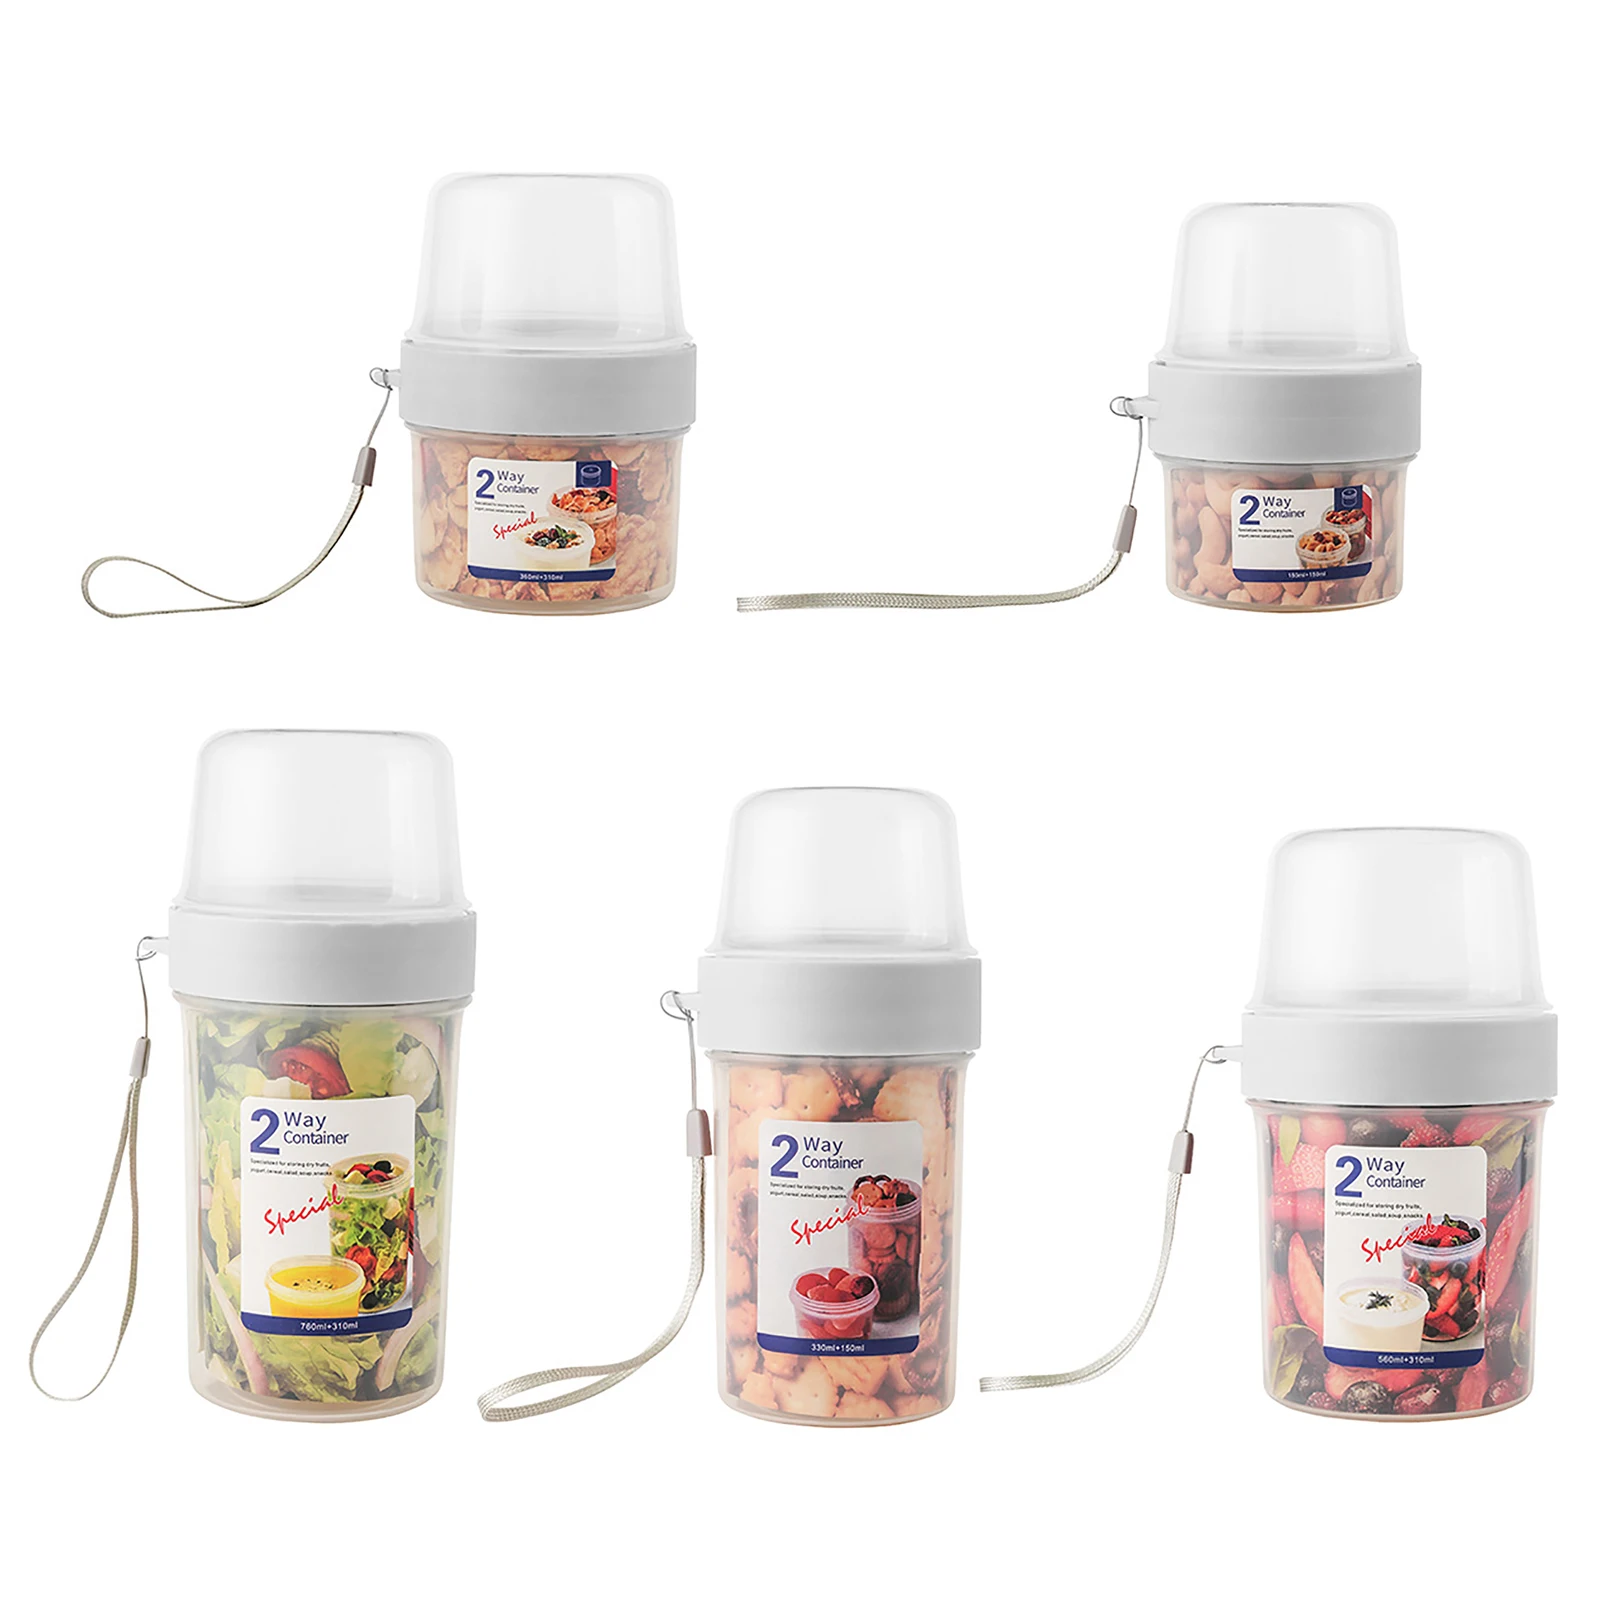 

Breakfast Cup to-go Multifunction Double Layer Cups Yogurt Milk Cereal Snack Cup Portable Food Storage Organizer Food Containers